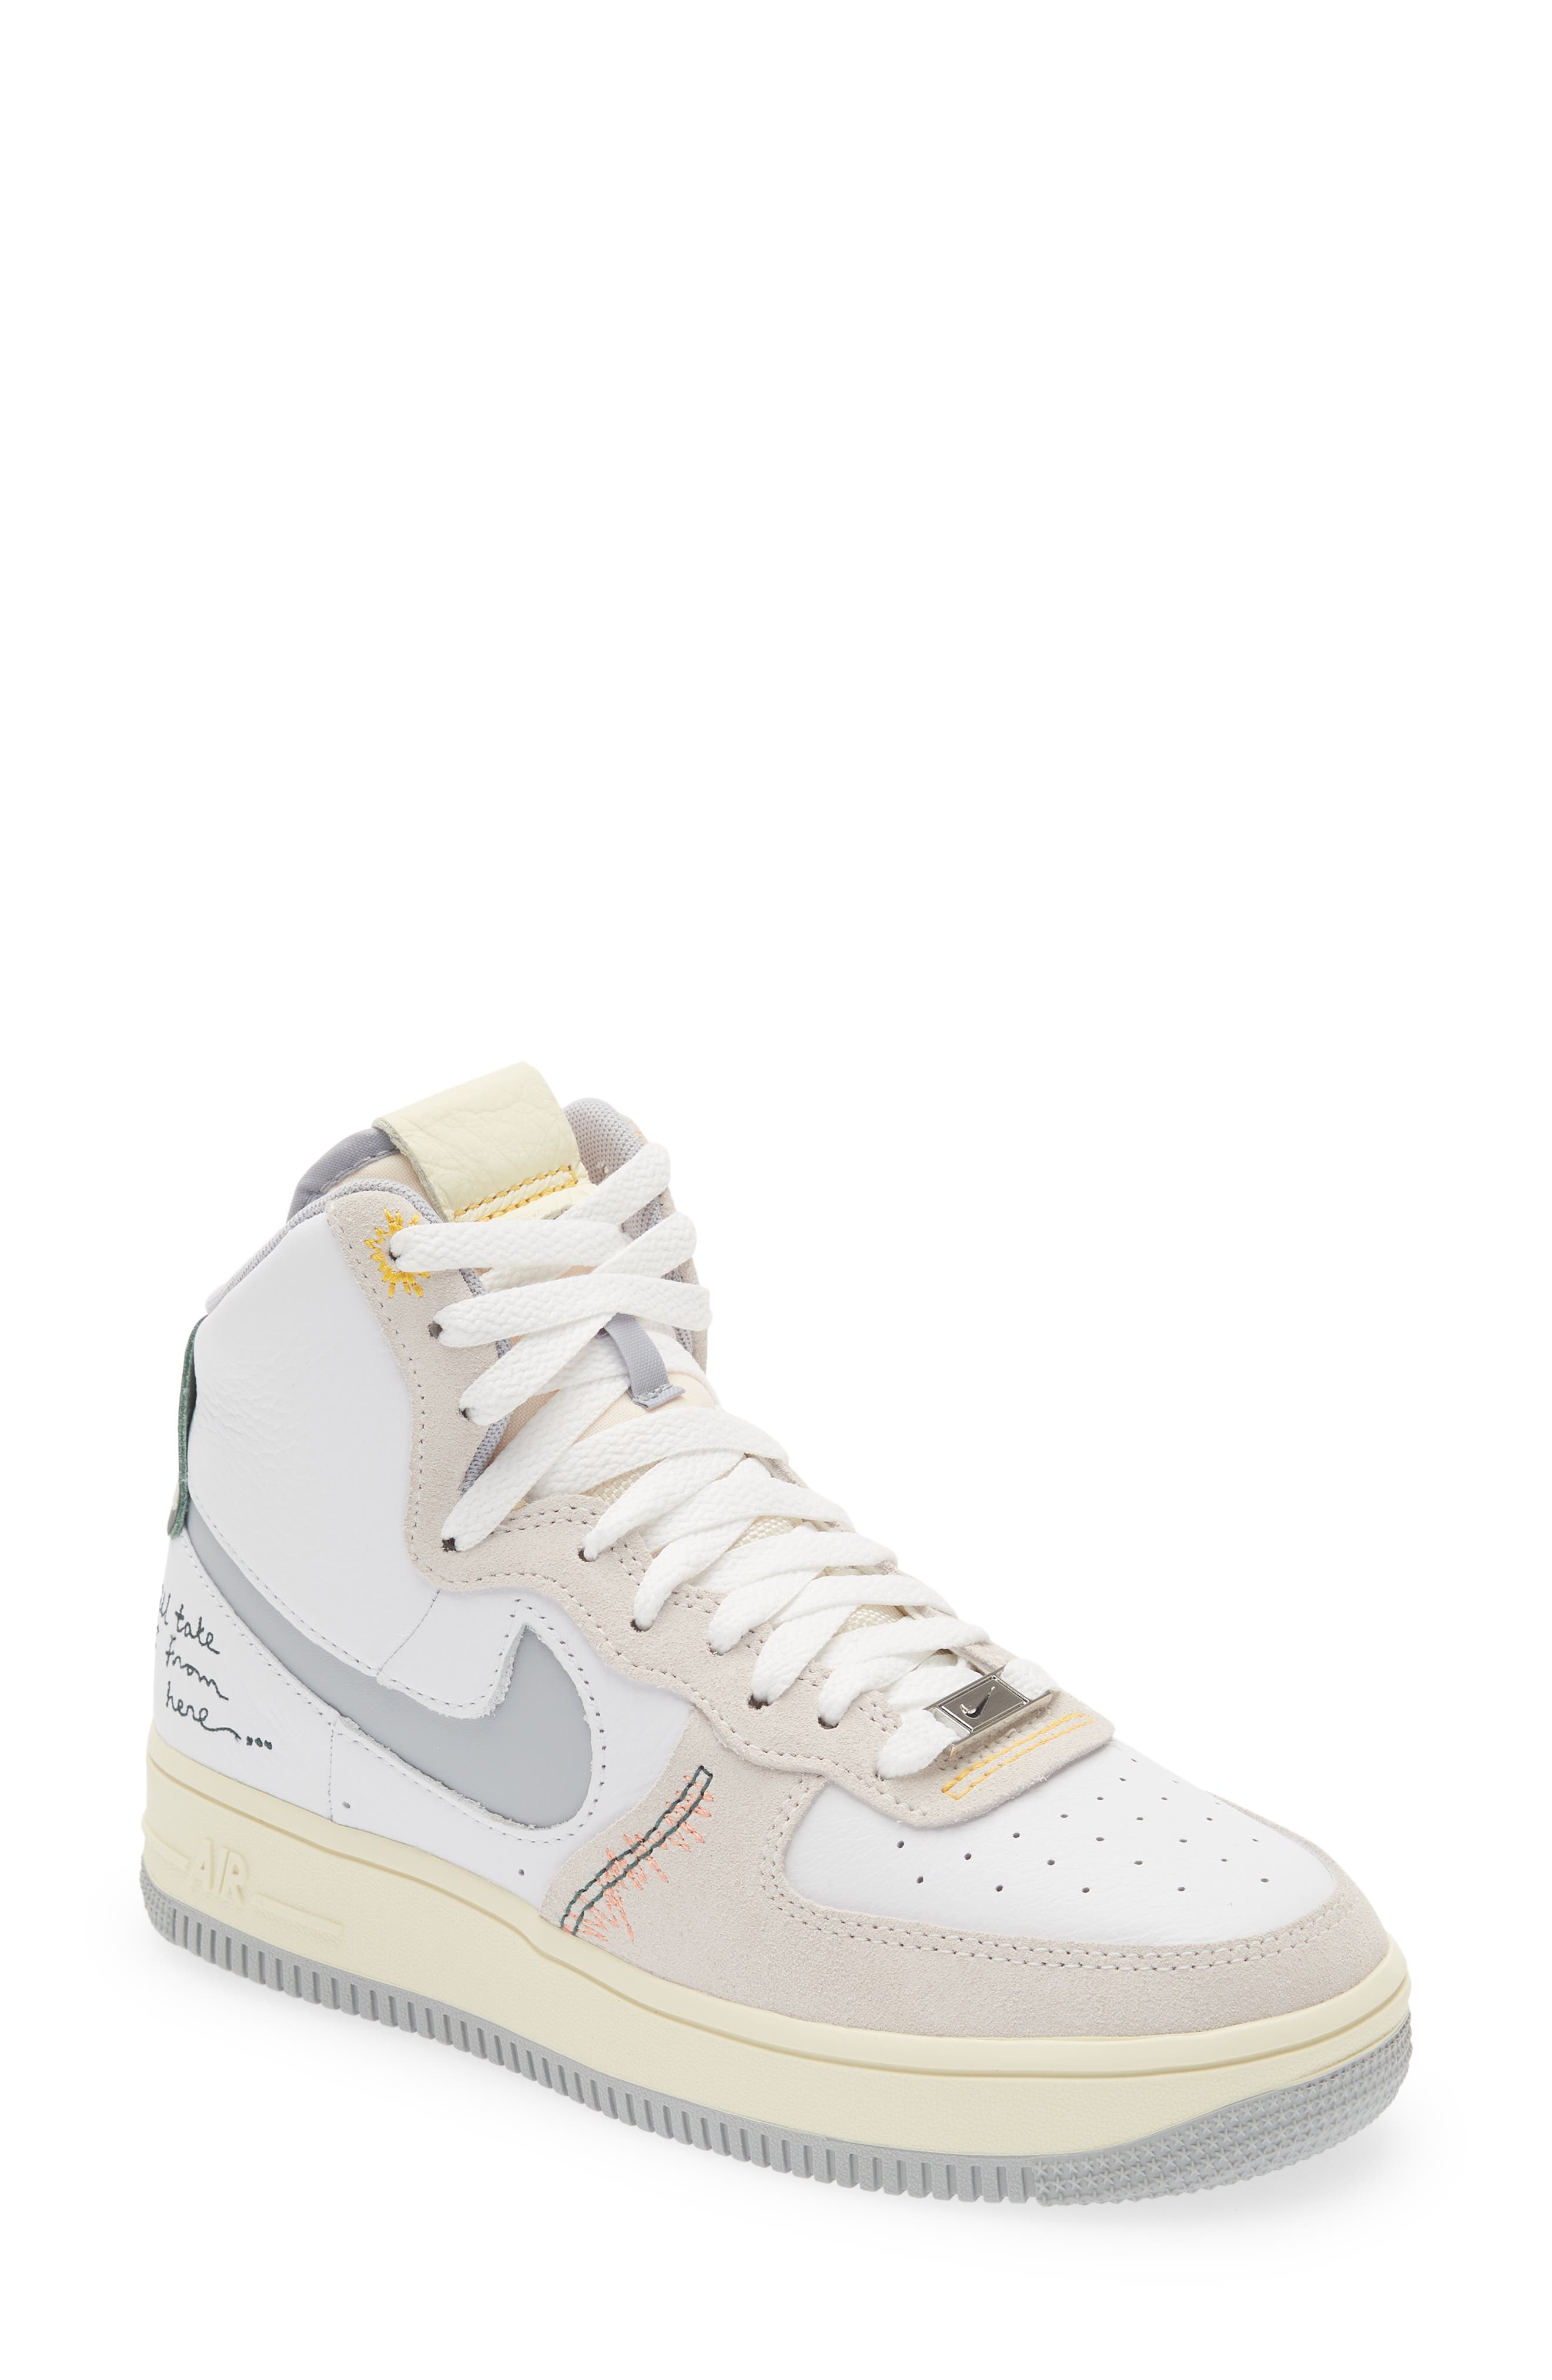 white nike air force 1 nordstrom